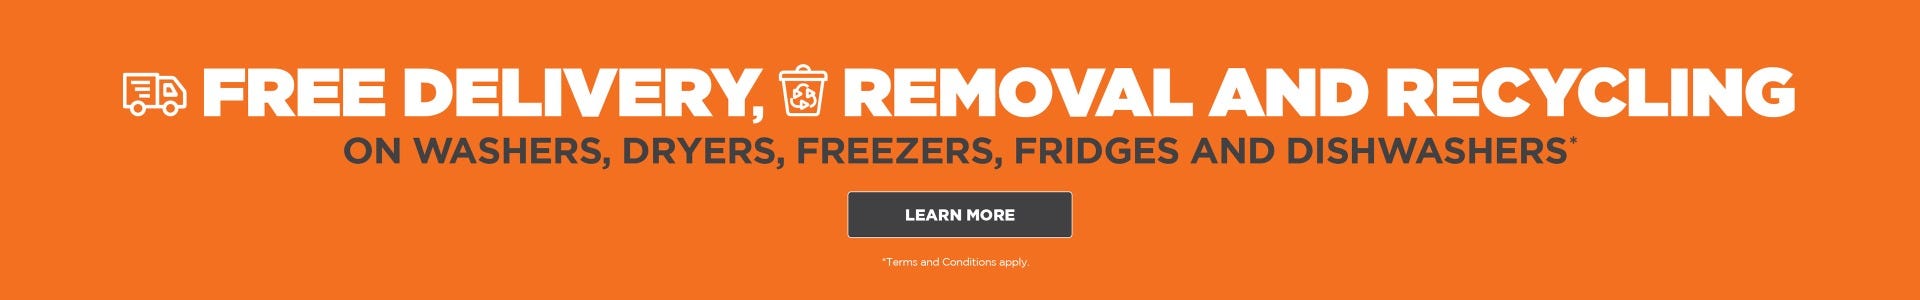 Free Delivery, Removal and Recycling on Washers, Dryers, Freezers, Fridges and Dishwashers*.